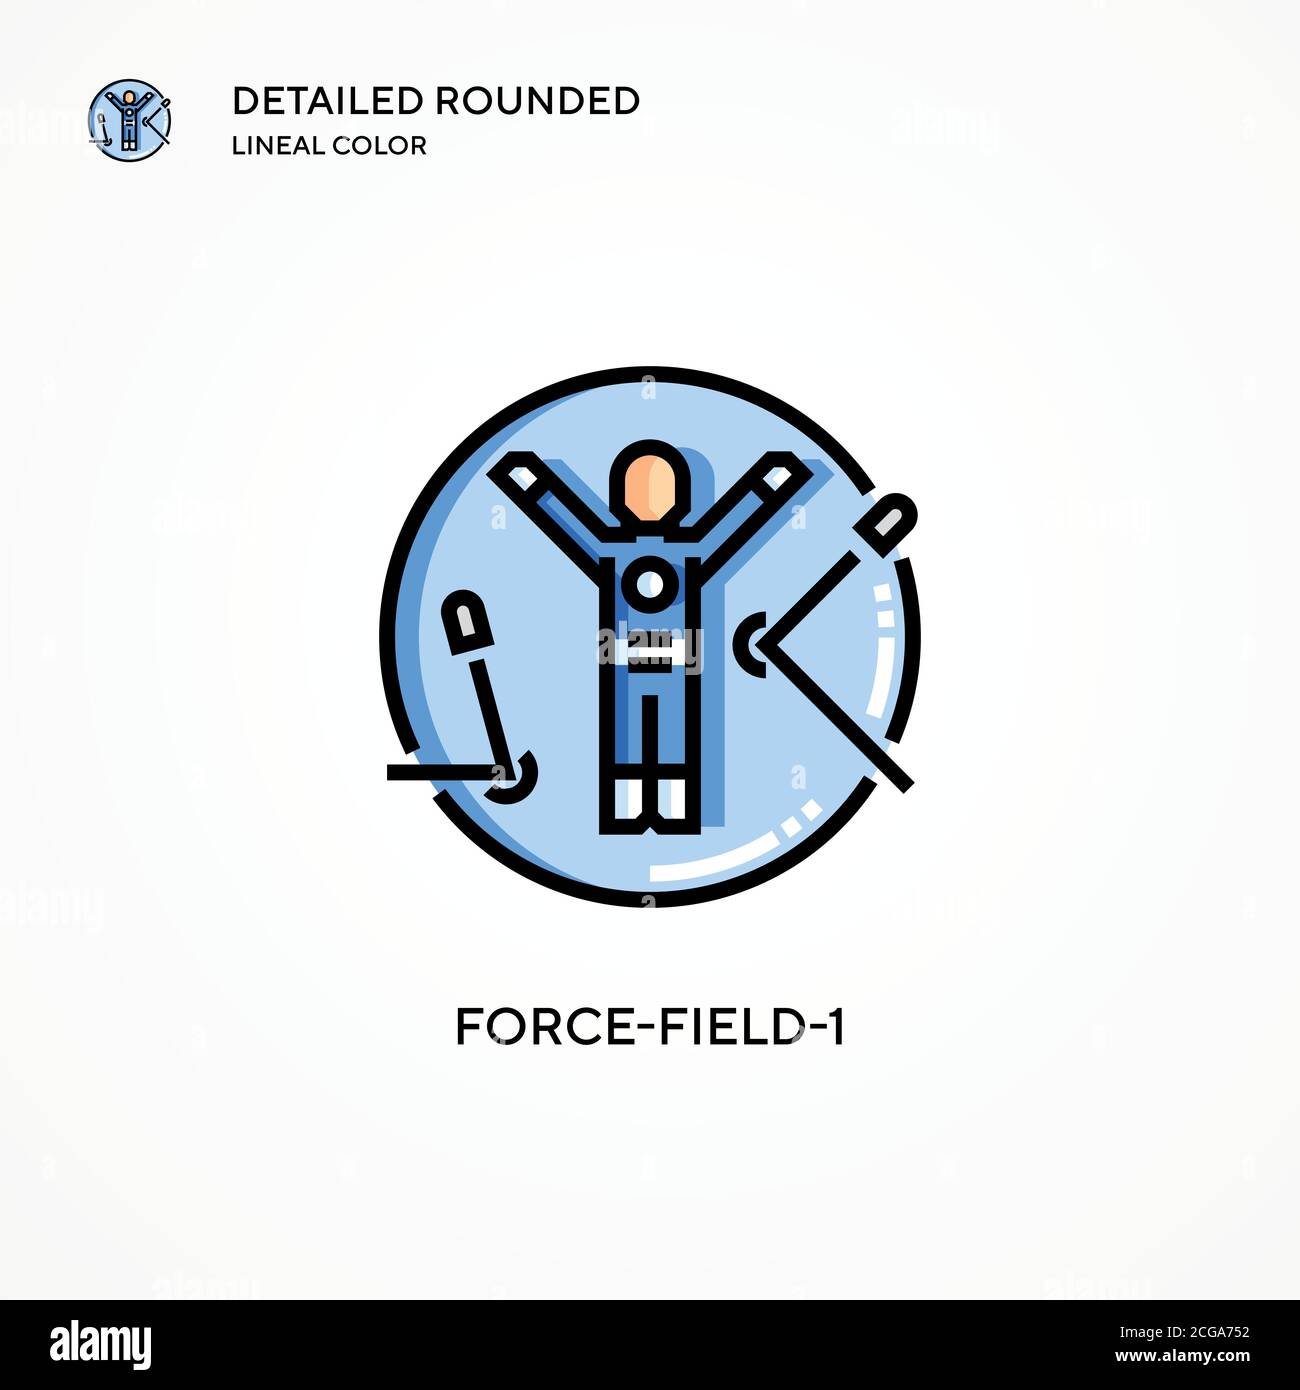 Force-field-1 vector icon. Modern vector illustration concepts. Easy to edit and customize. Stock Vector